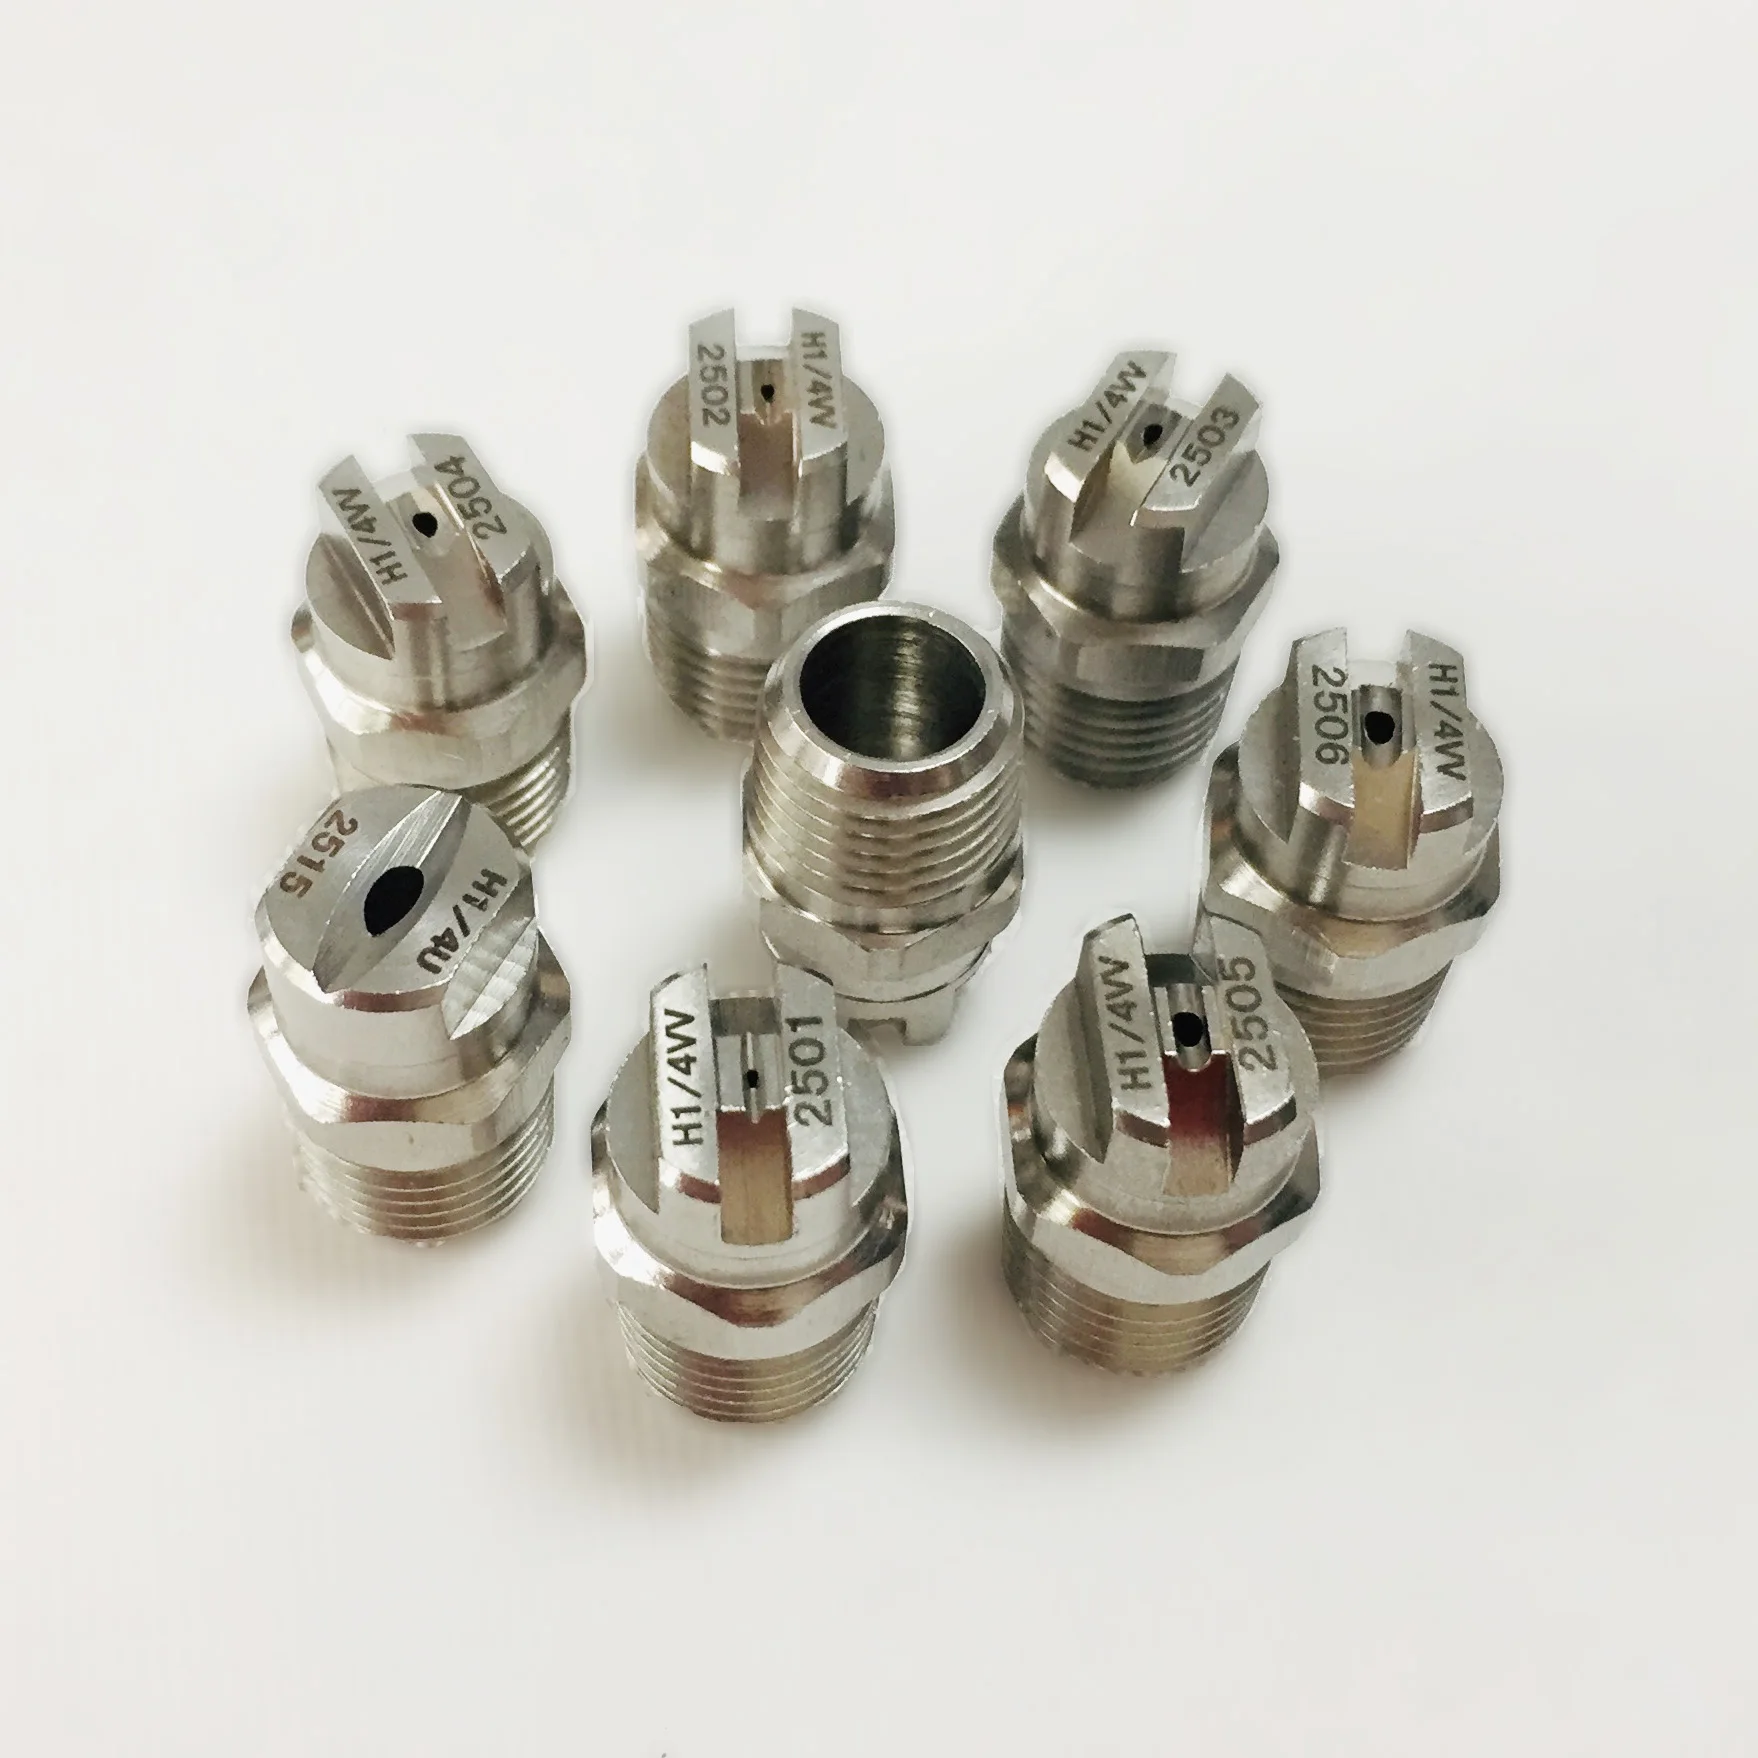 10 pcs 25/45/65/80/95/110 degree 1/4" SS304 vee jet flat fan spray nozzle, Industrial / factory cleaning, dust removal nozzle